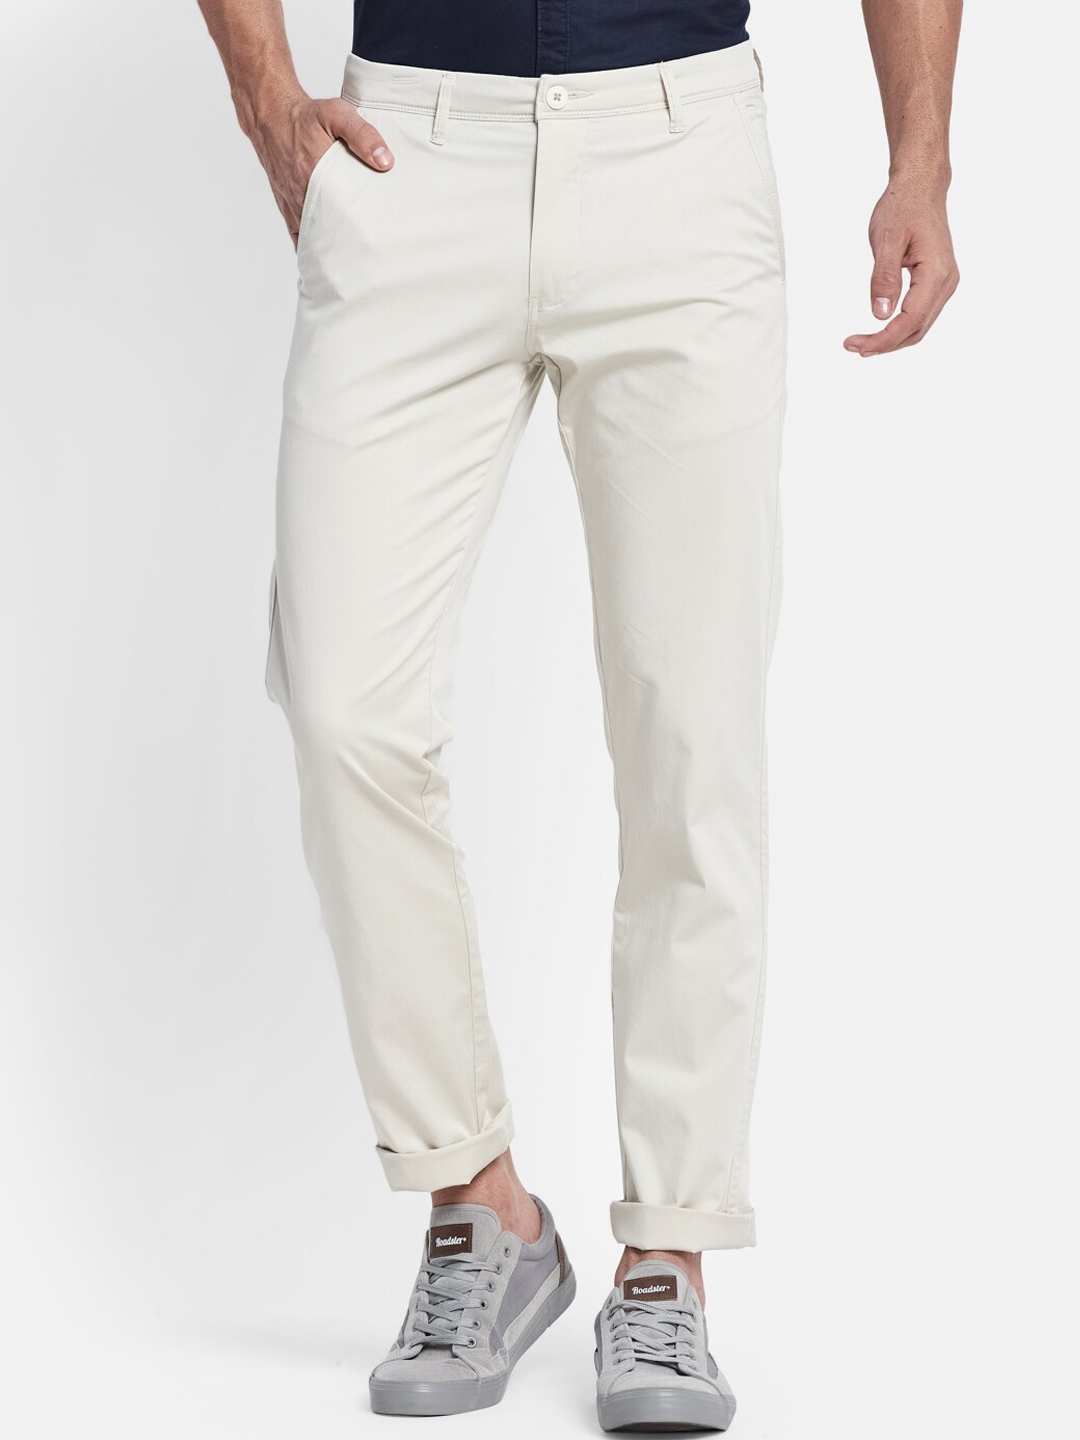 Buy Octave Men OFF White Chinos Trousers - Trousers for Men 19005132 ...